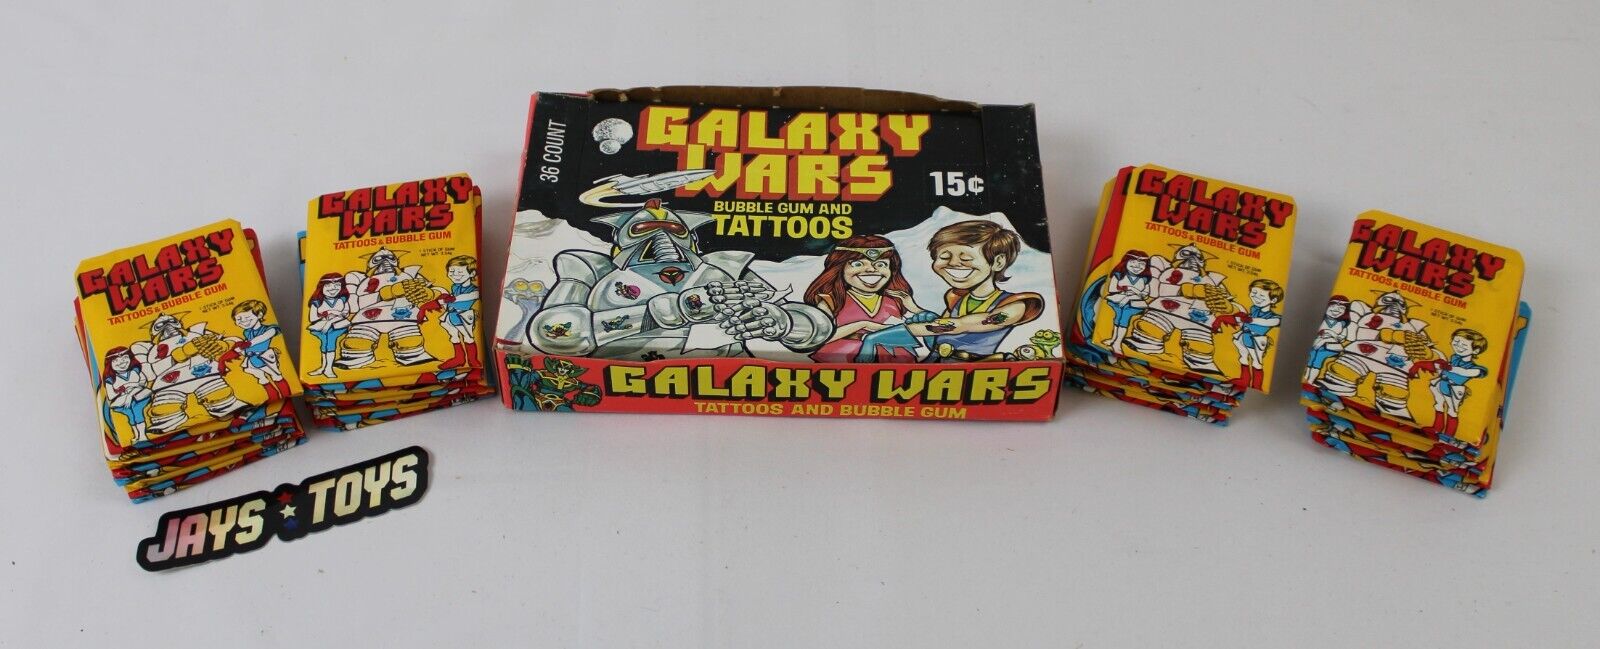 Donruss 1973 Galaxy Wars Bubble Gum and Tattoos - 36 Sealed Packs with Box